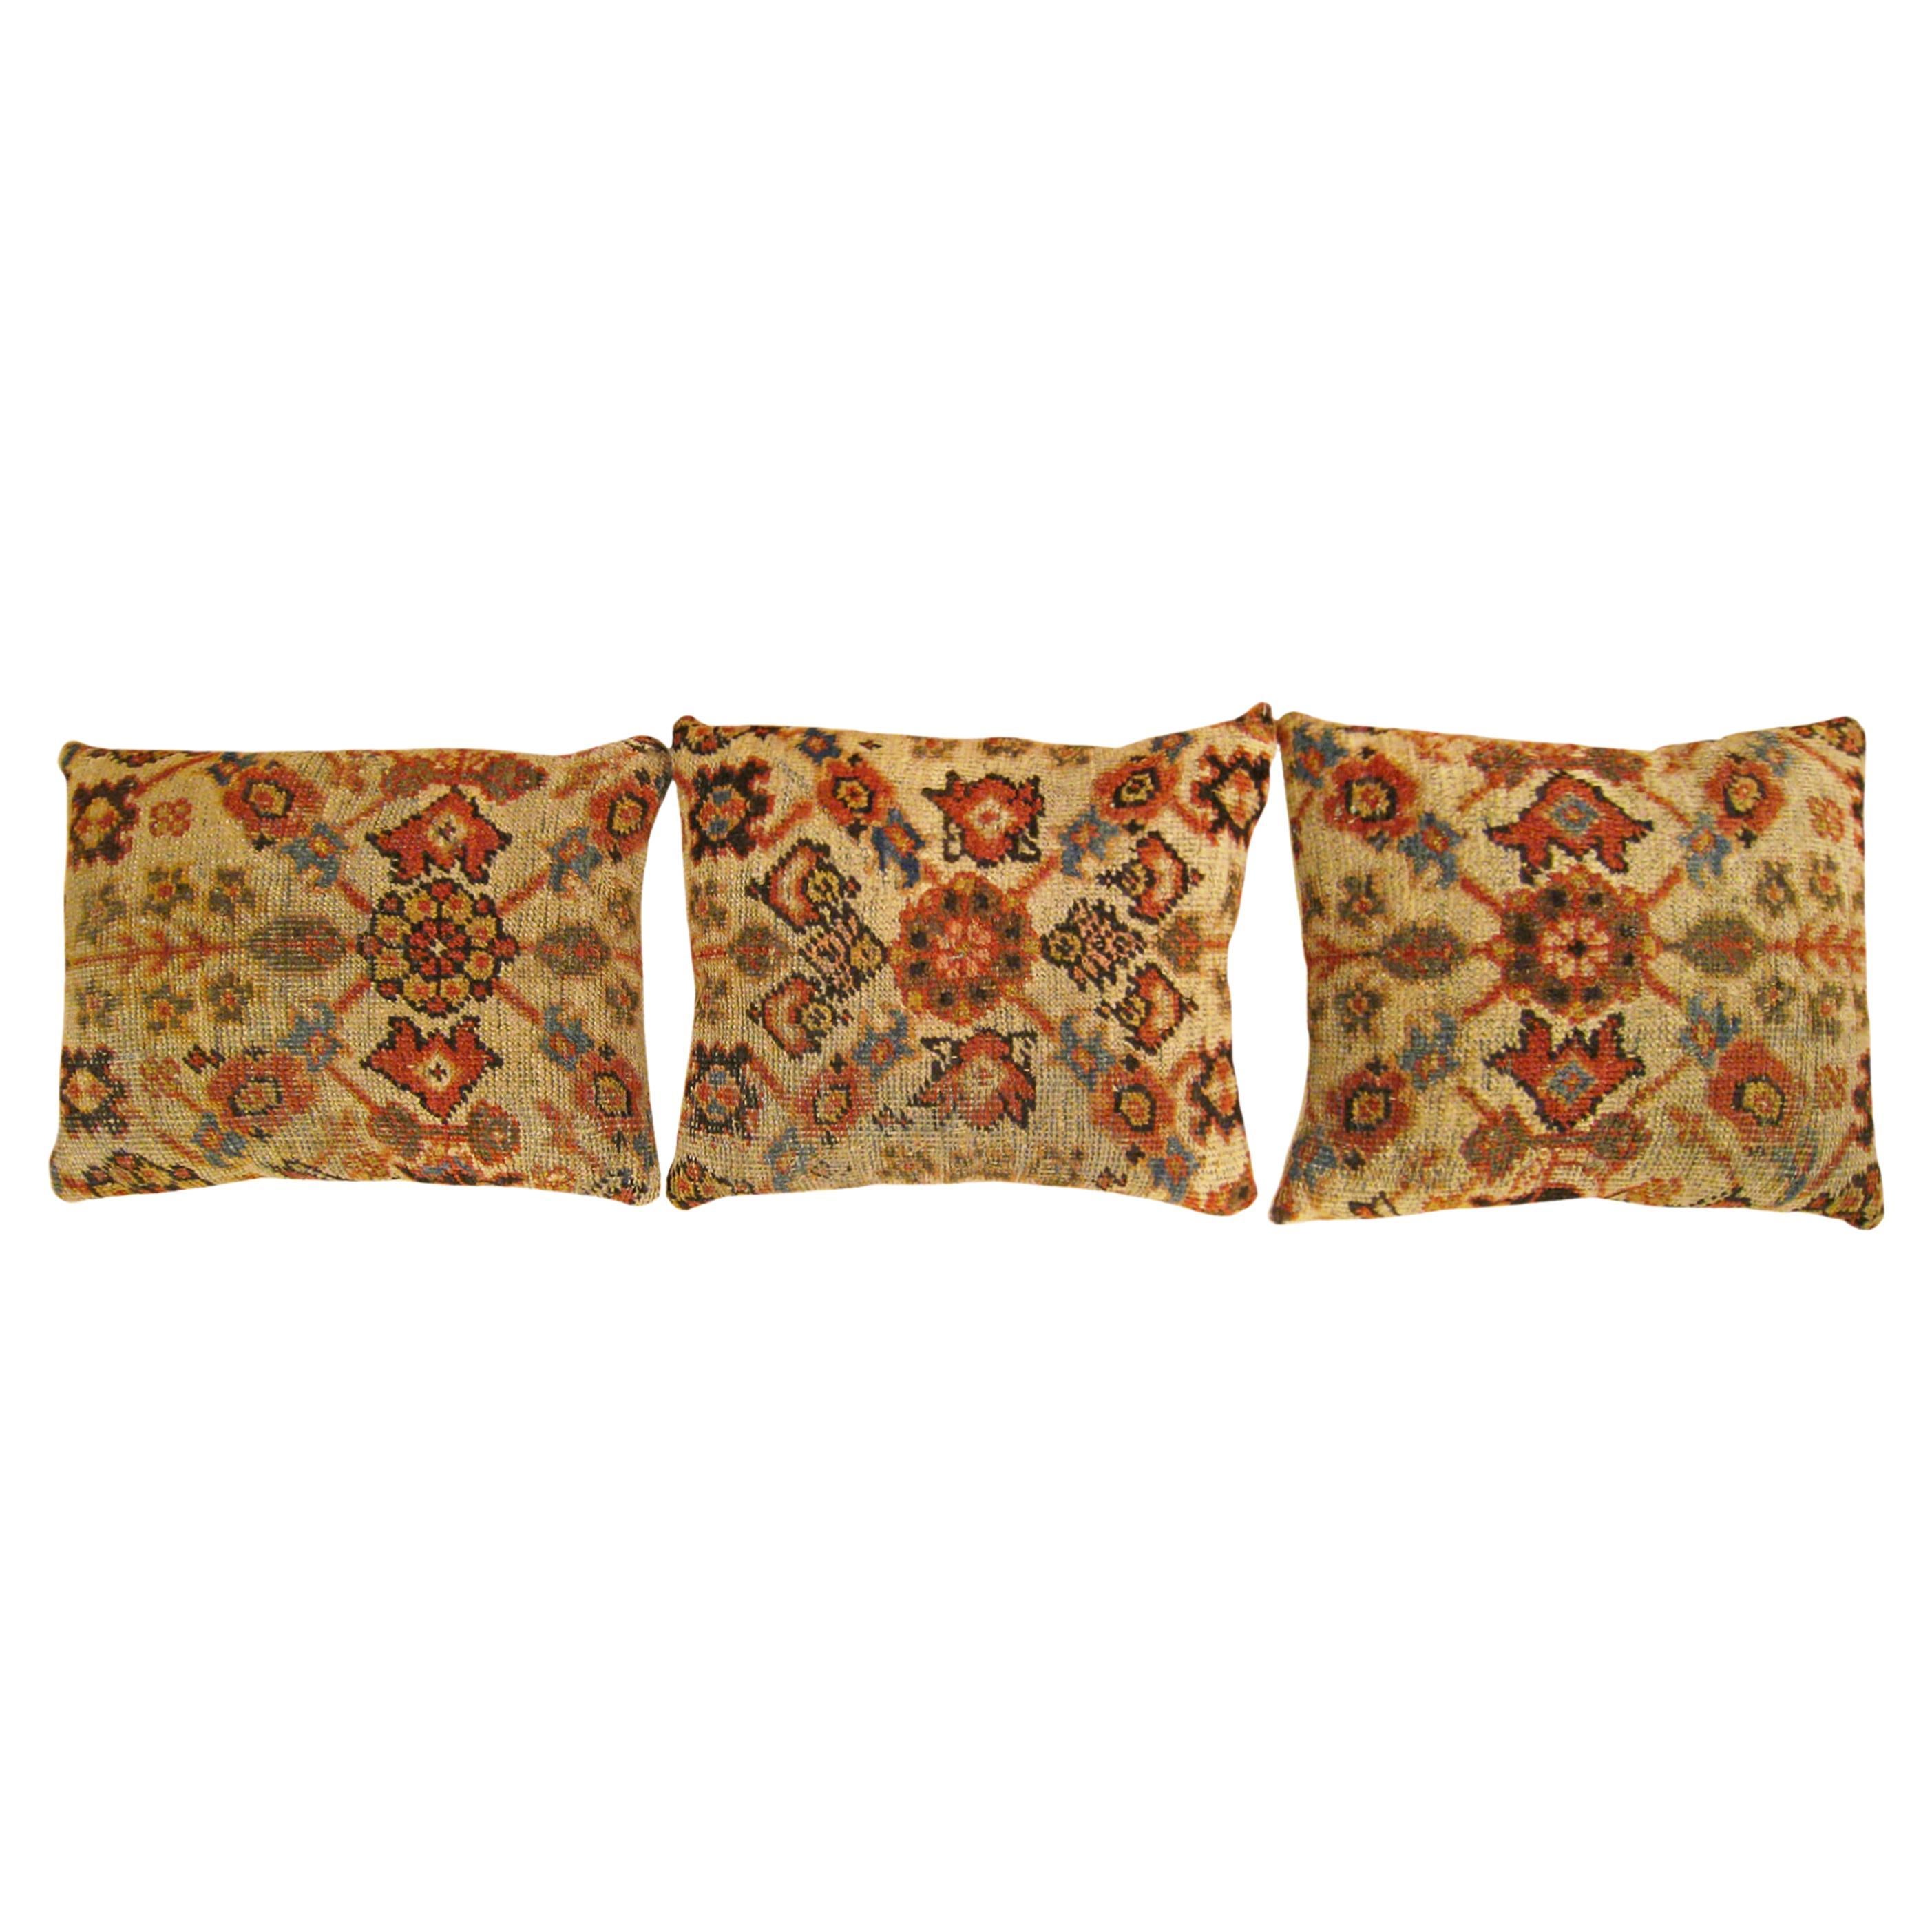 Set of Decorative Antique Persian Sultanabad Pillows with Floral & Geometric